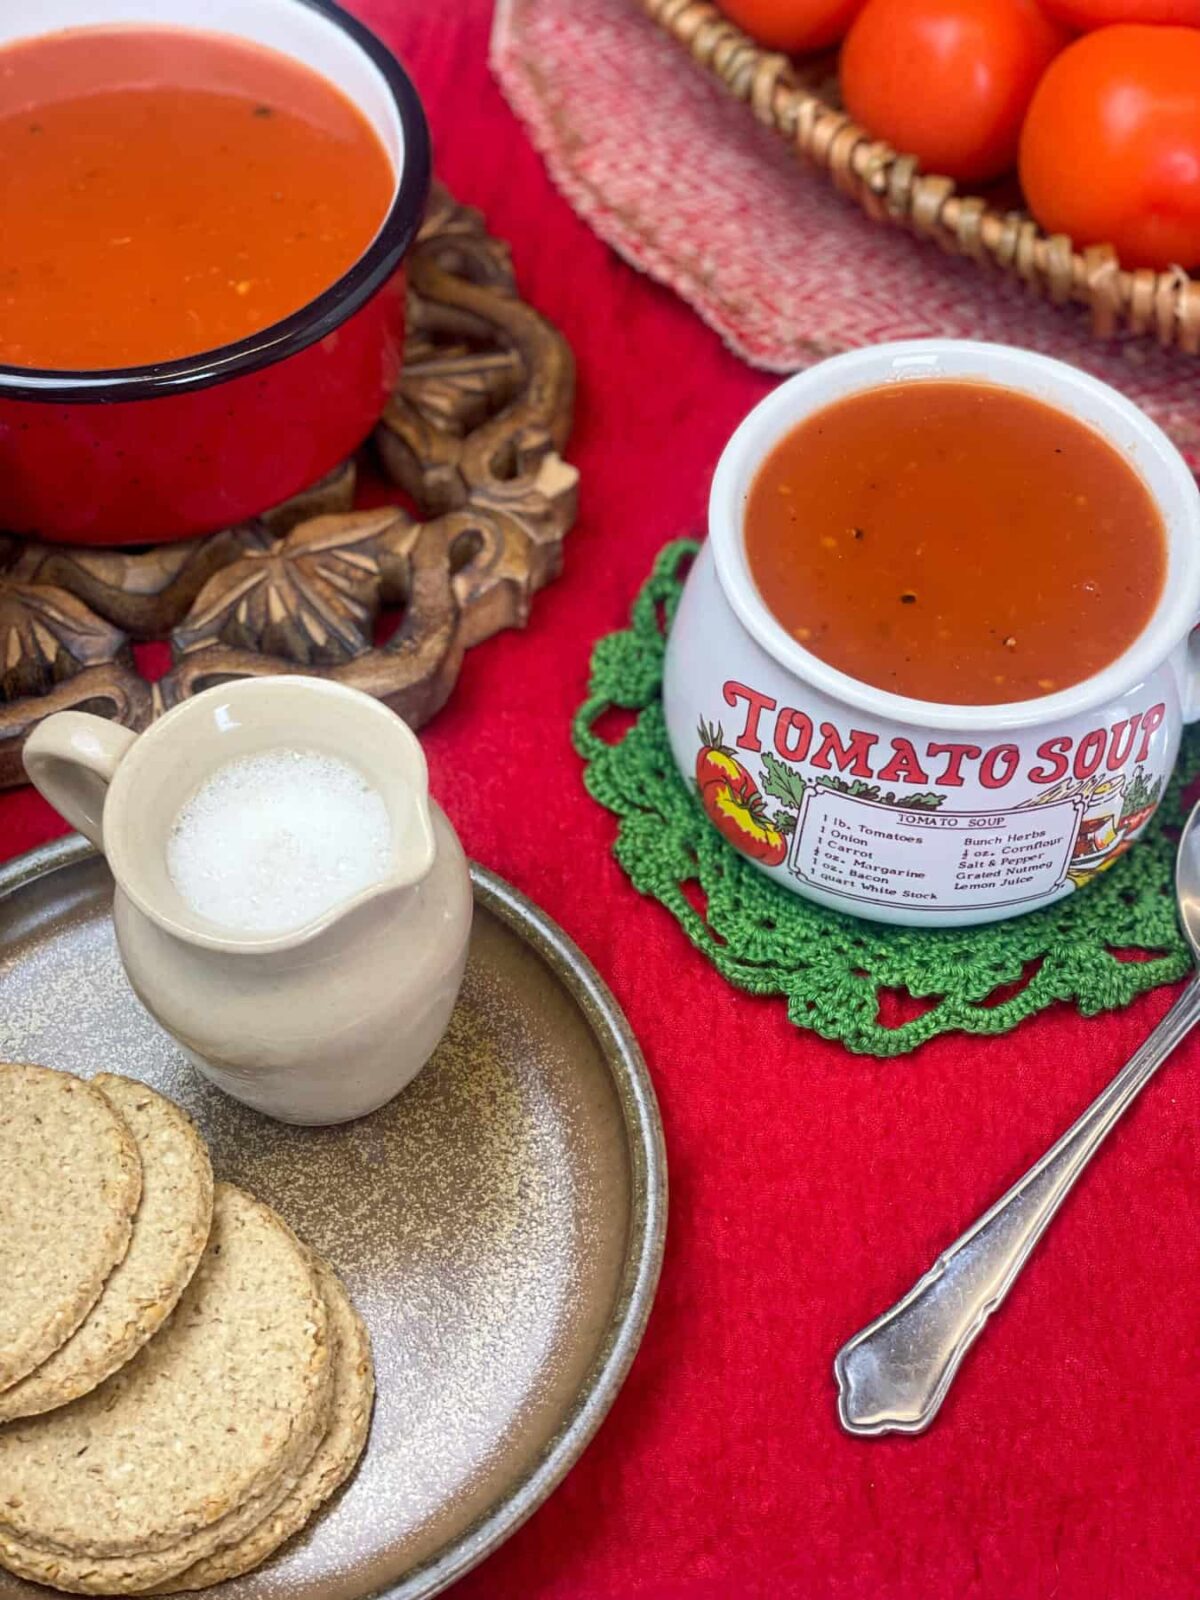 Mug of tomato soup on a green doily, brown plate with small milk jug and oatcakes, red pot with tomato soup to side on a brown trivet, basket to tomatoes to side, red tablecloth.